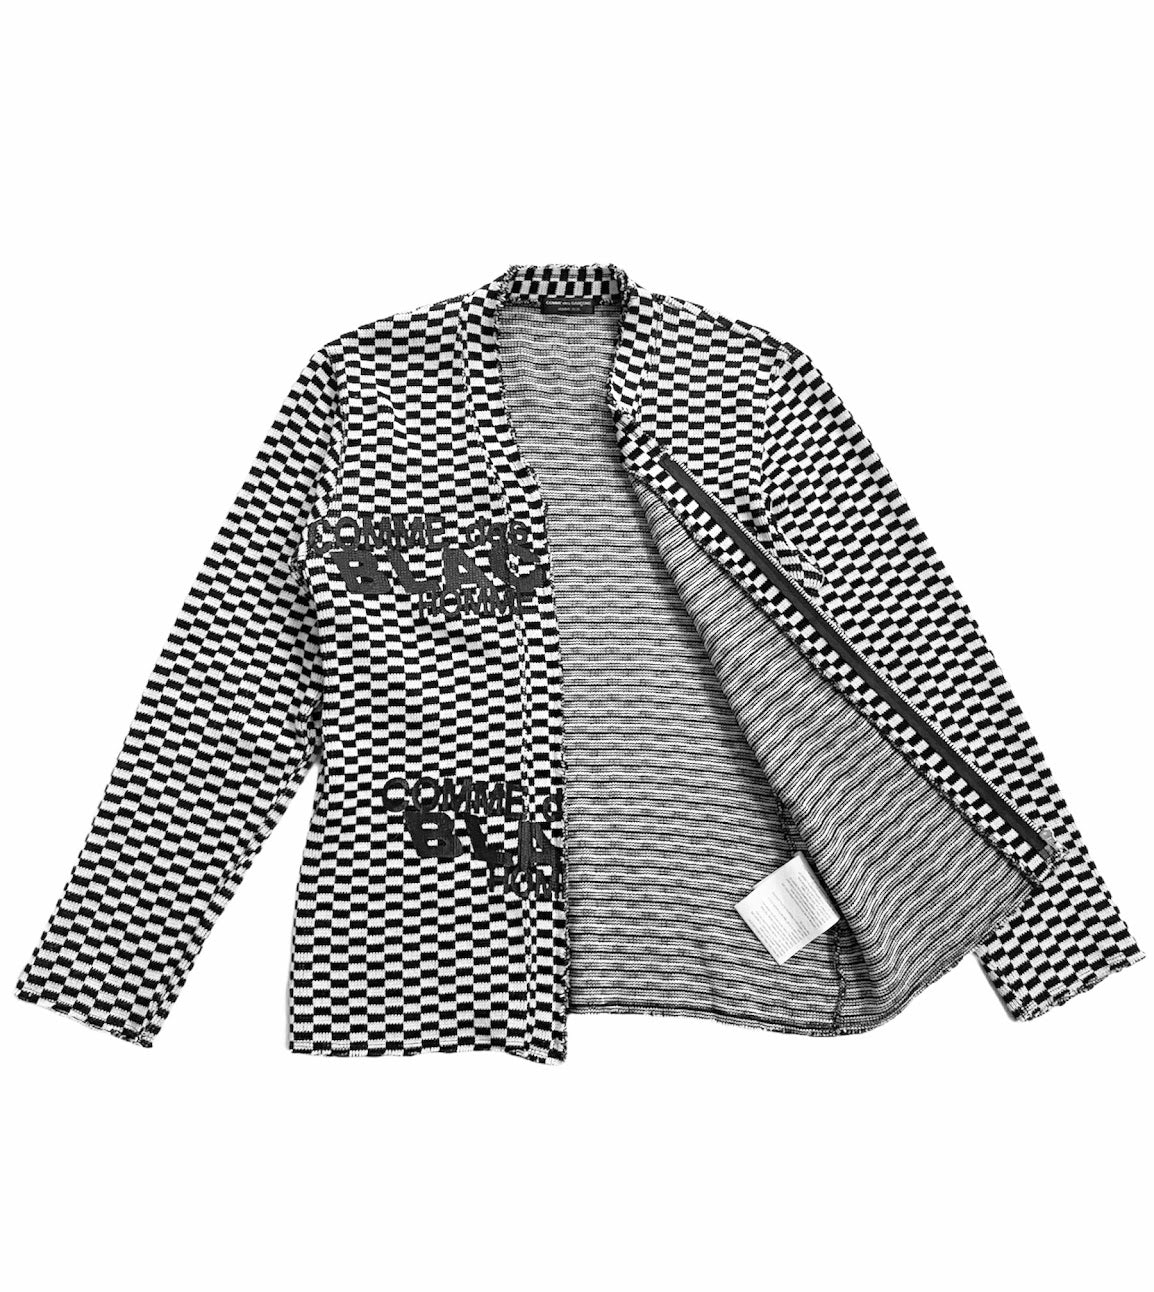 Comme des Garcons Homme Plus AD2002 Checkered Logo Knit Cardigan